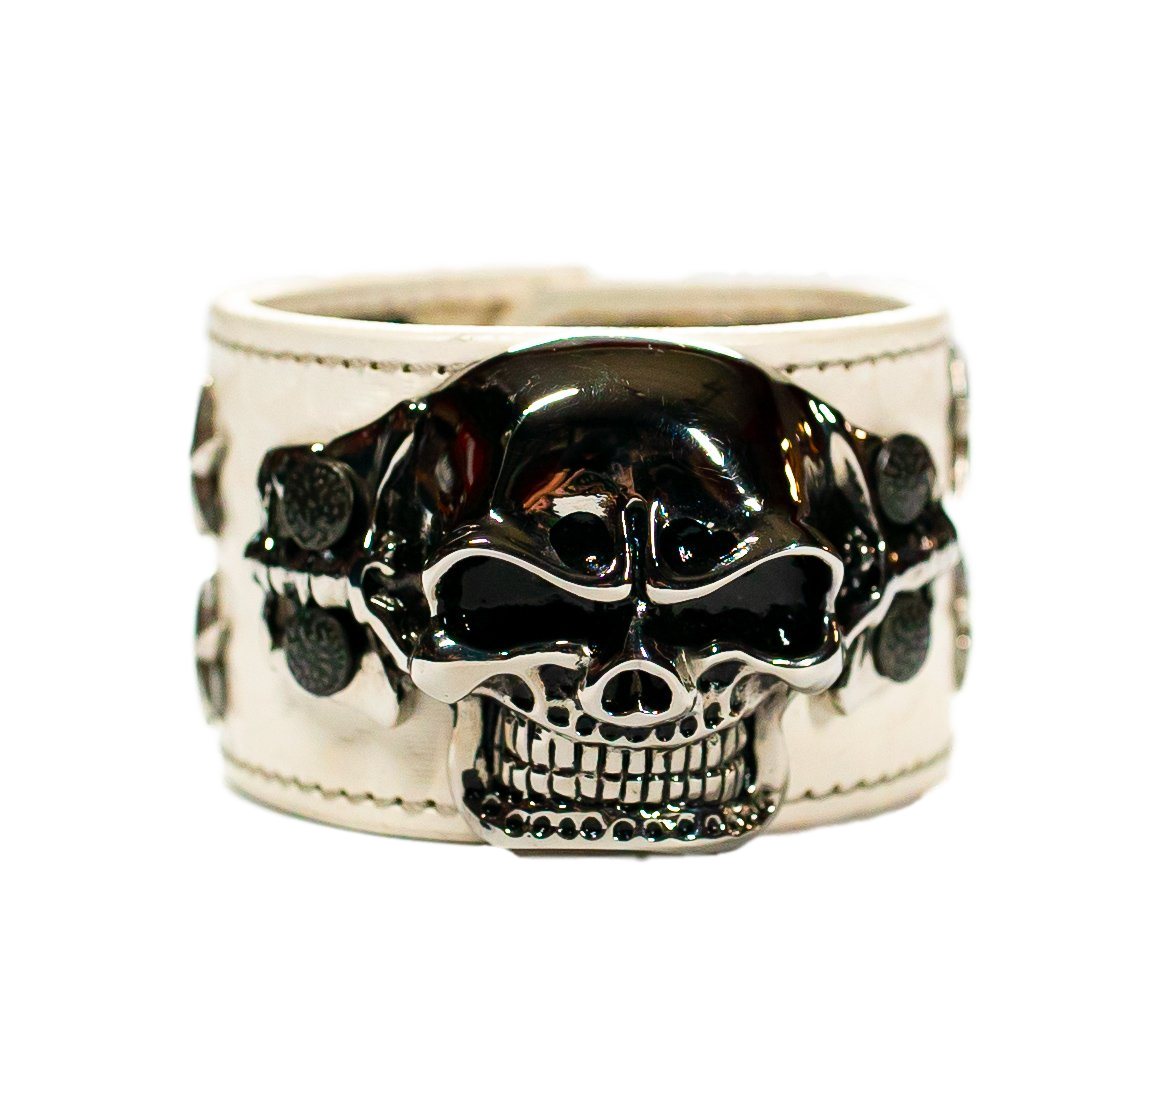 The Big Skull White Leather